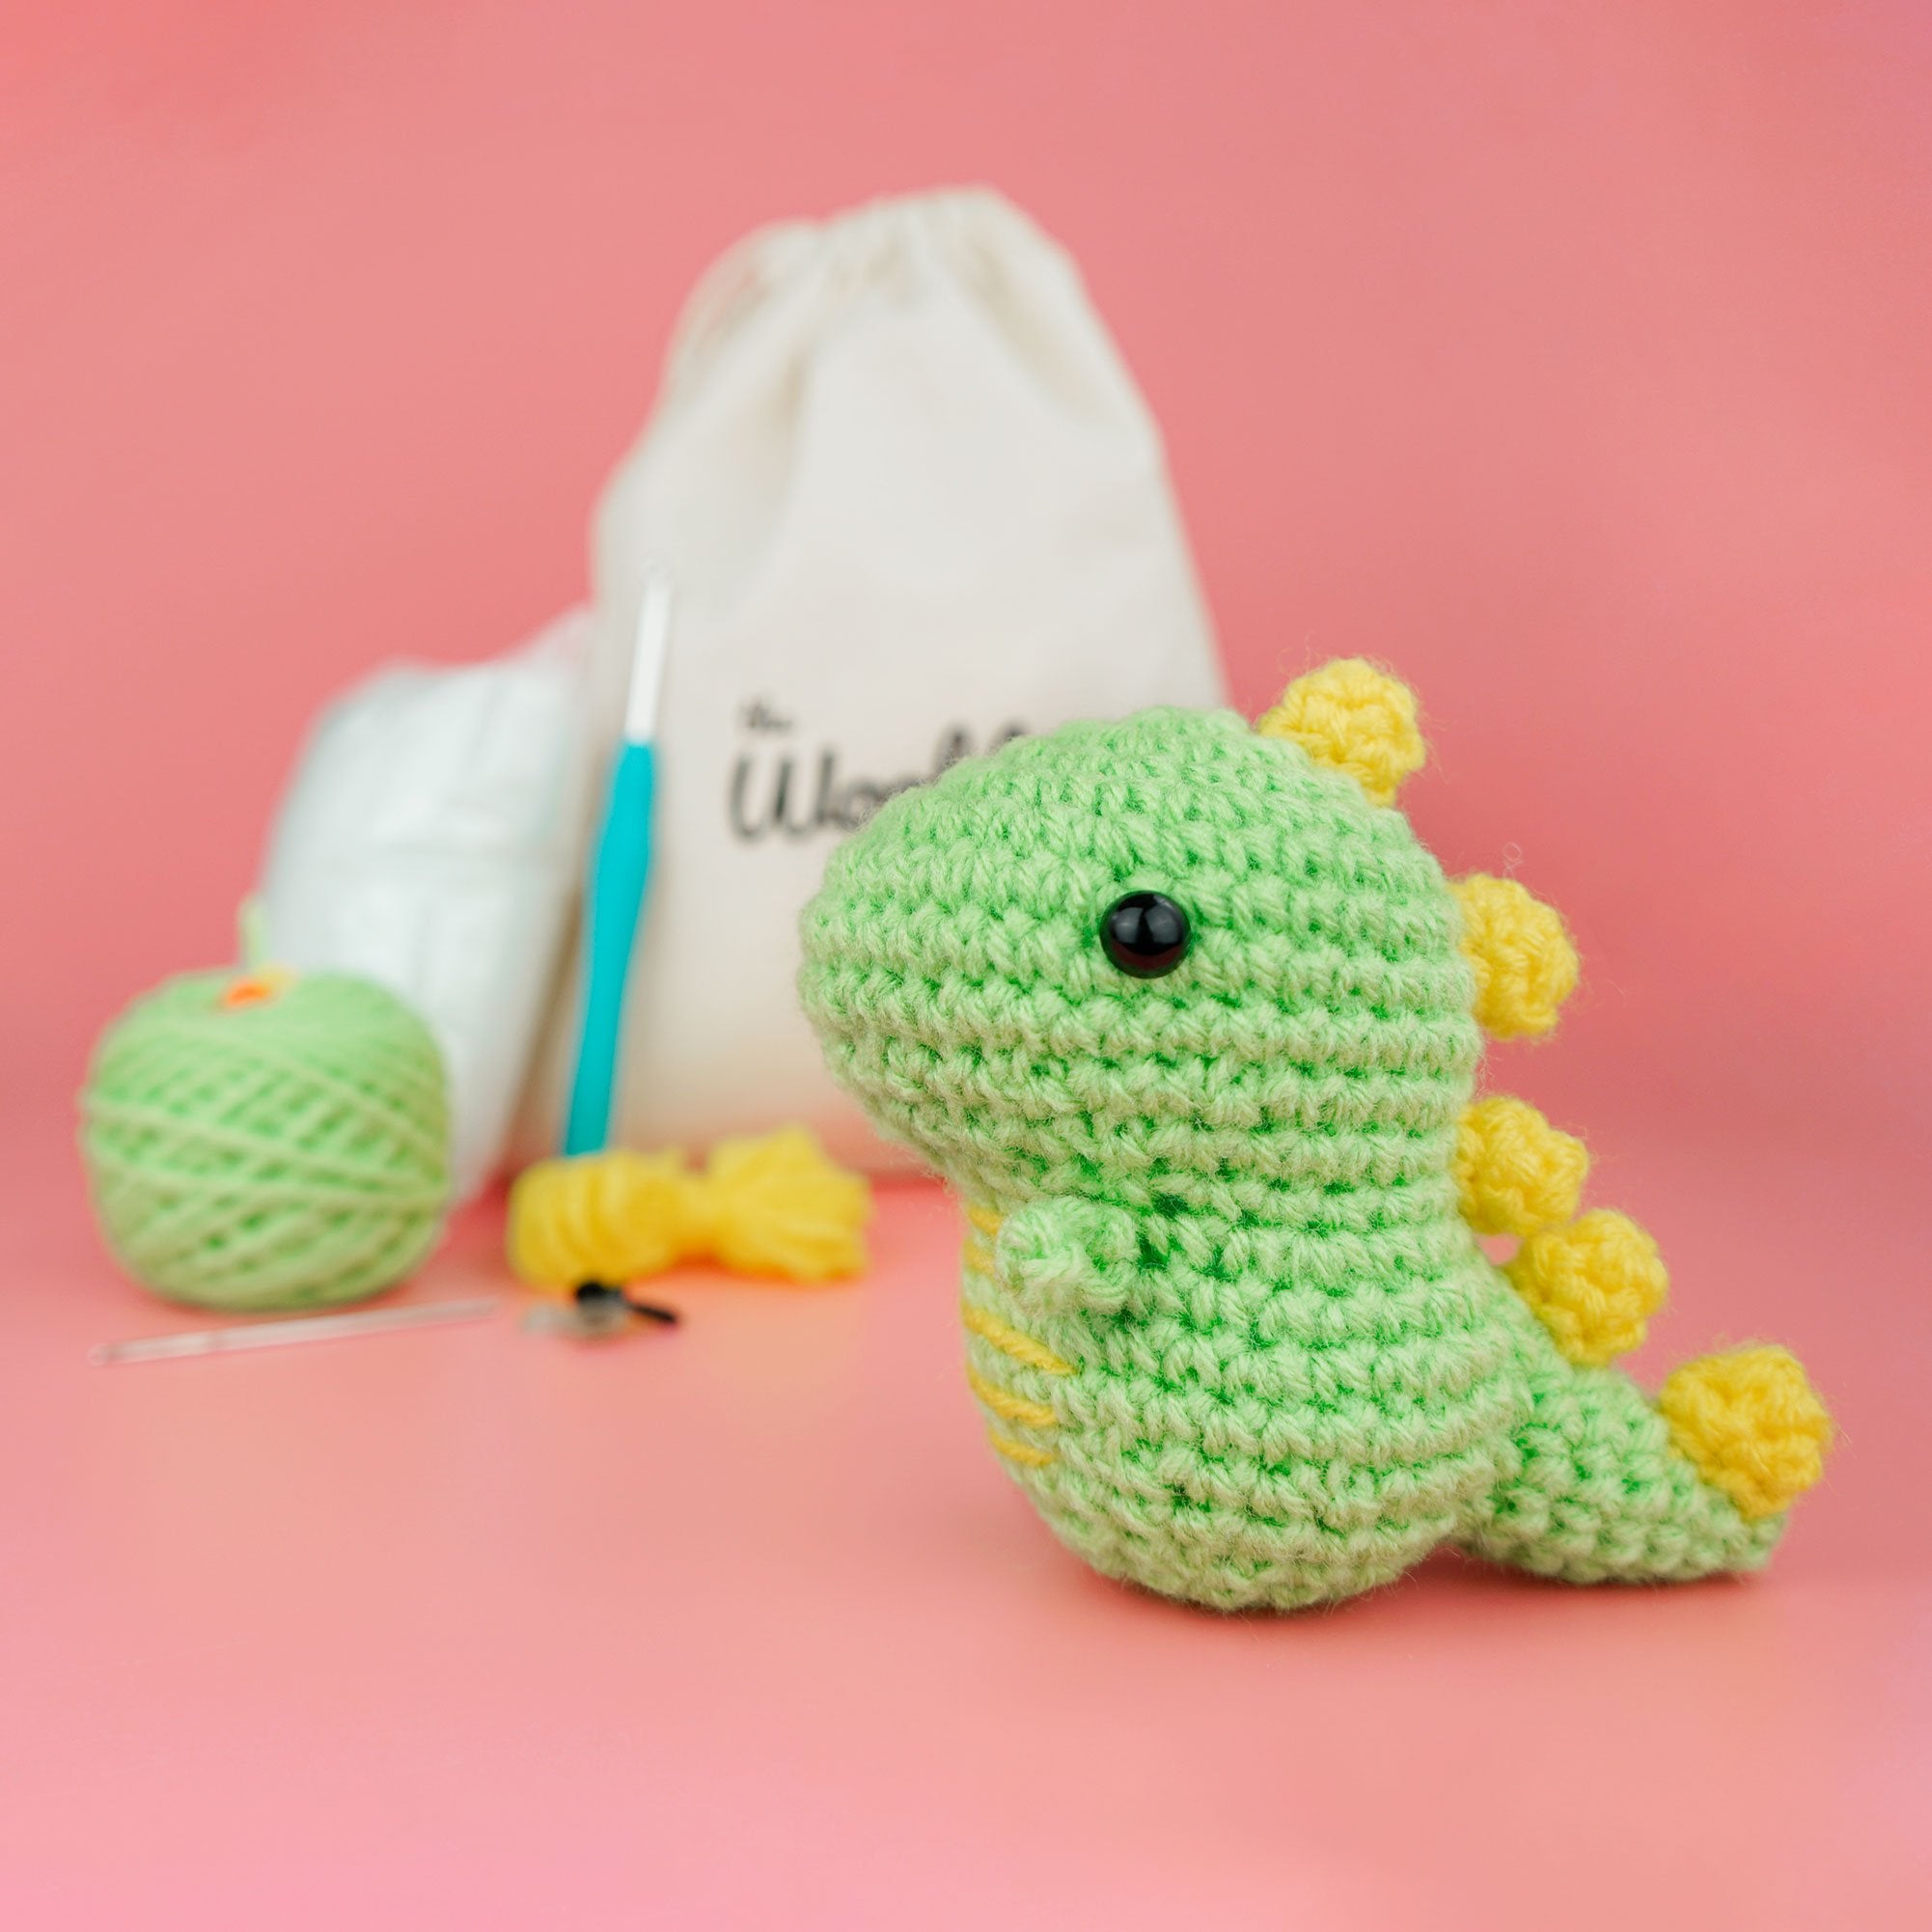 small green and yellow crocheted dino in front of the kit